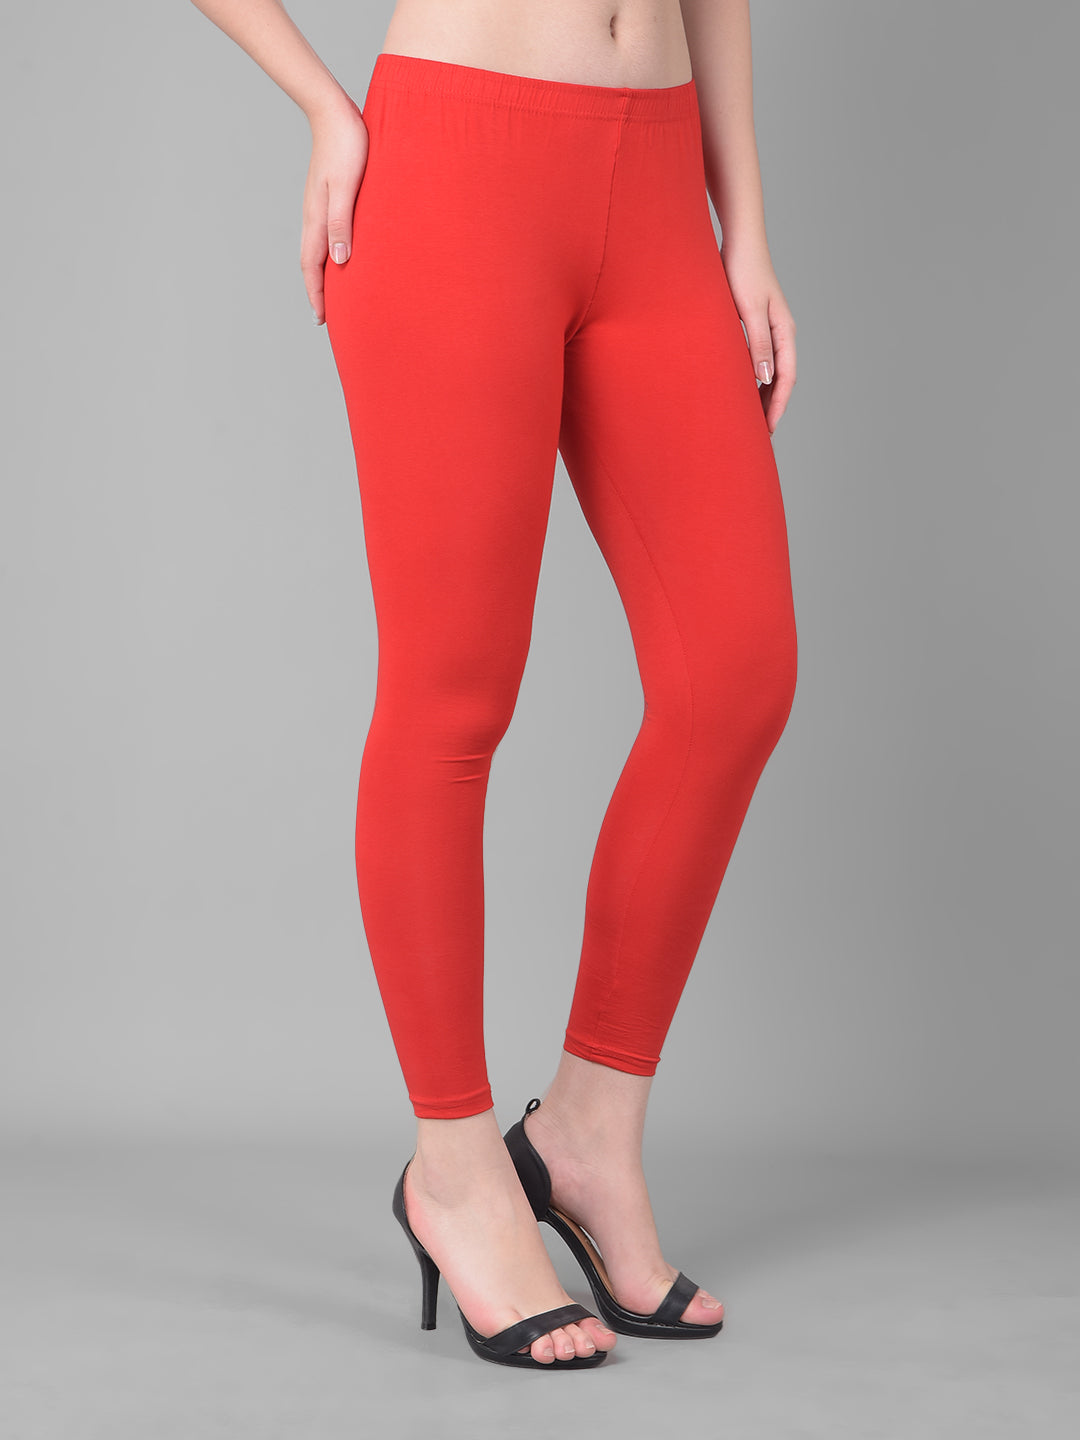 Comfort Lady Regular Fit Ankle Length Leggings - Comfort Lady Private Limited